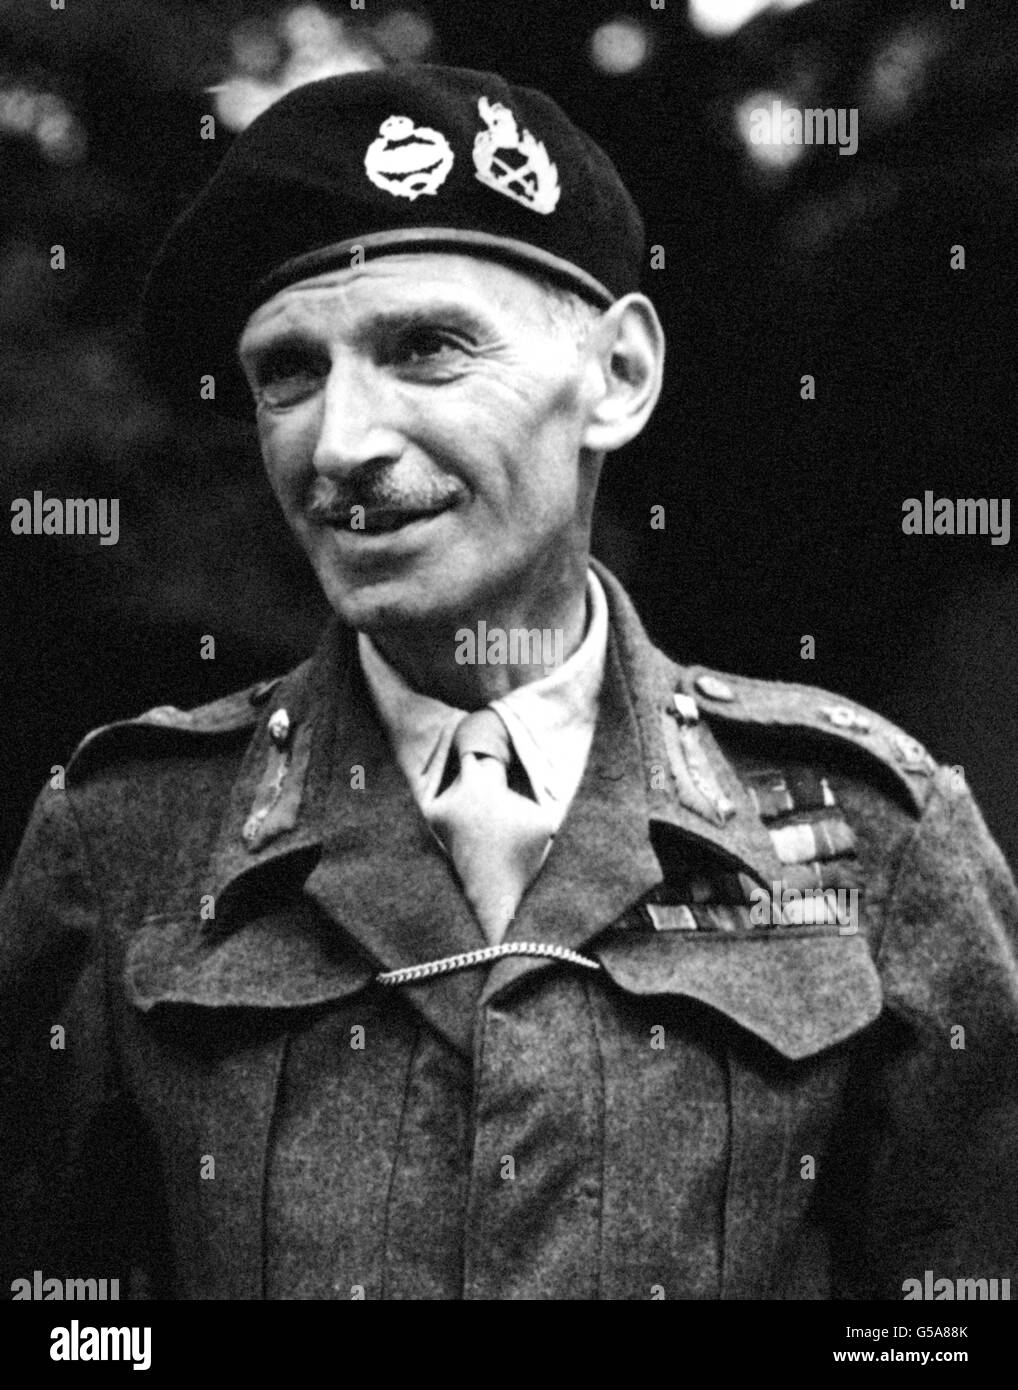 MONTY'S DOUBLE 1946: Field Marshal Montgomery's official double, Lieutenant Clifton James, who flew to Gibraltar, posing as Montgomery, to fool the Geremans just before D-Day (the Normandy landings). He is pictured at Chilham Castle pageant. Stock Photo